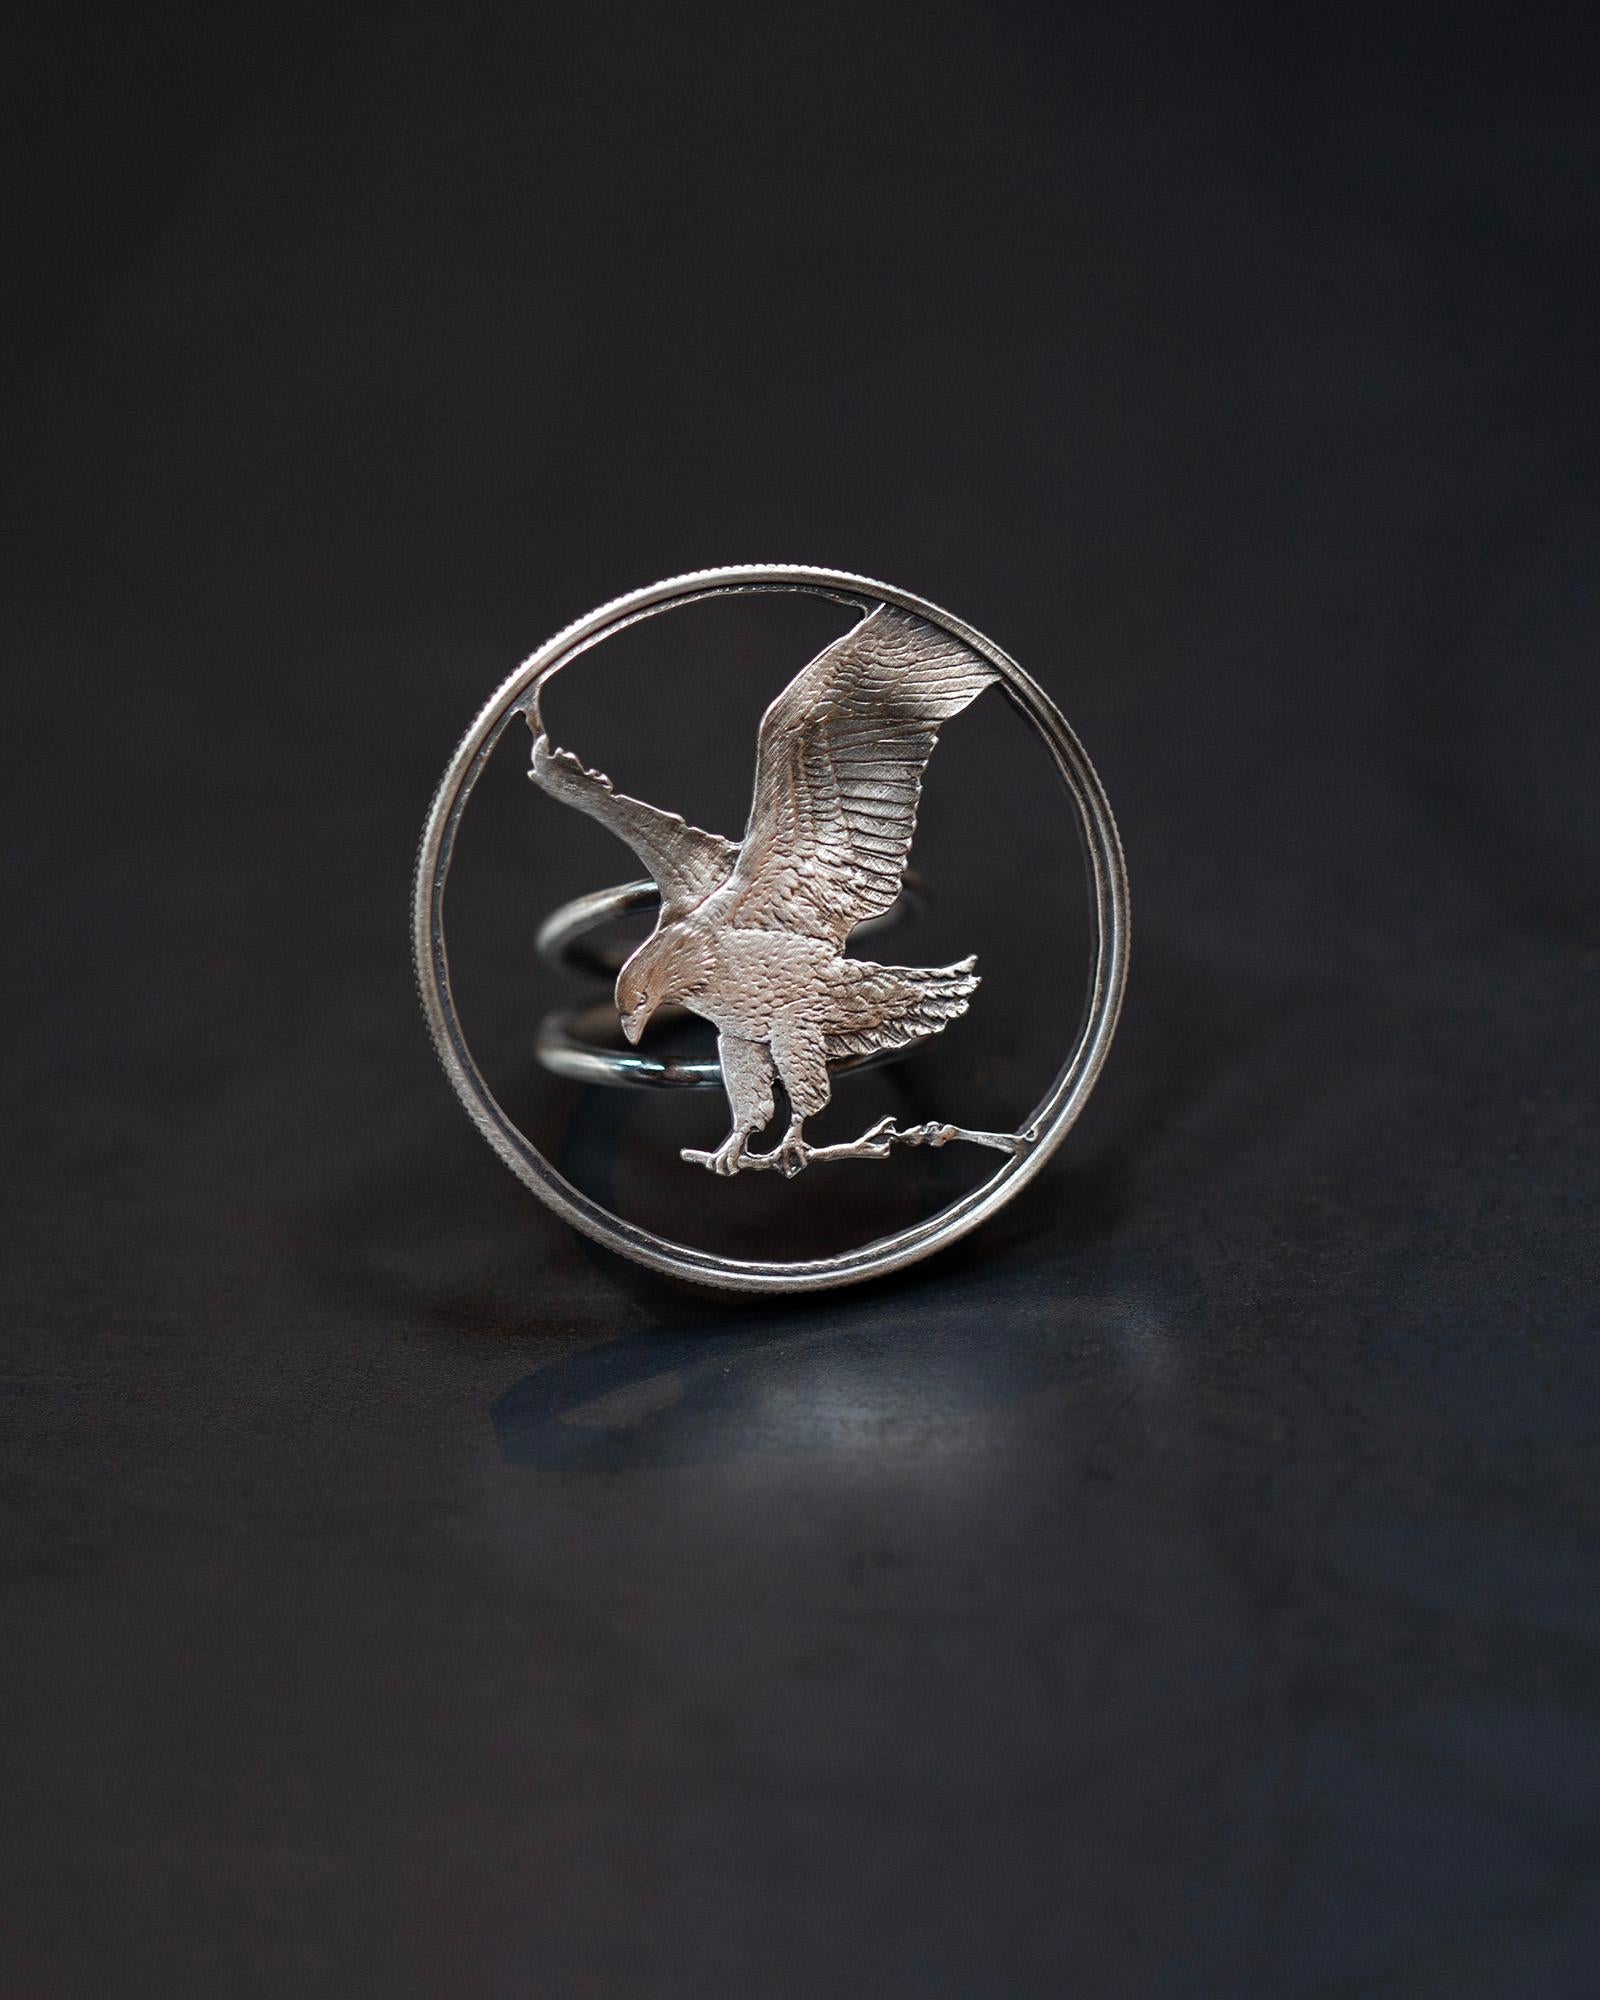 This solid sterling silver ring features the back of a hand sawn silver dollar Walking Liberty bullion coin. This is a vintage silver coin has a fabricated sterling silver band and will be sized to your order. Just let me know your size when